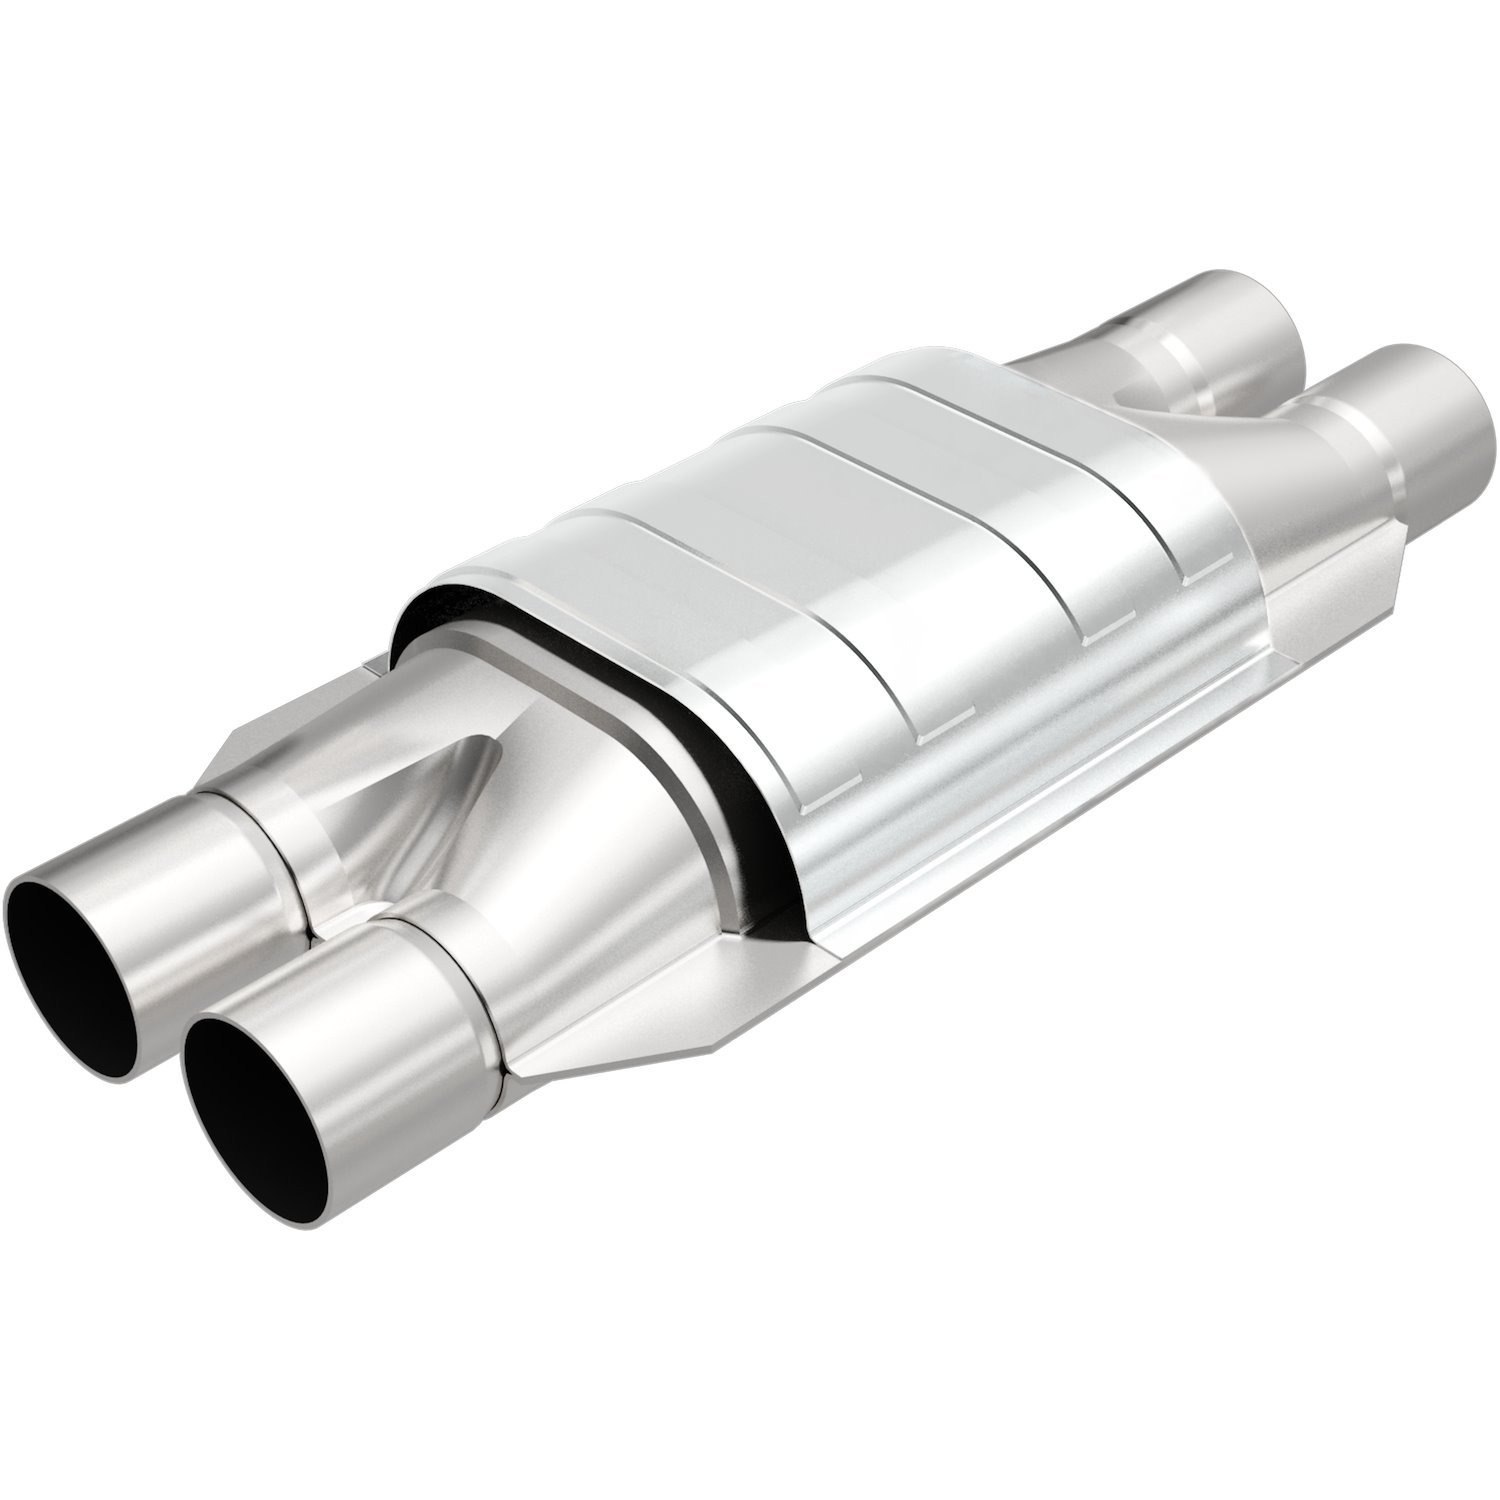 Oval Catalytic Converter 2" Inlet/Outlet Diameter 17.375" Overall Length 13.375" Body Length 6.375" Wide